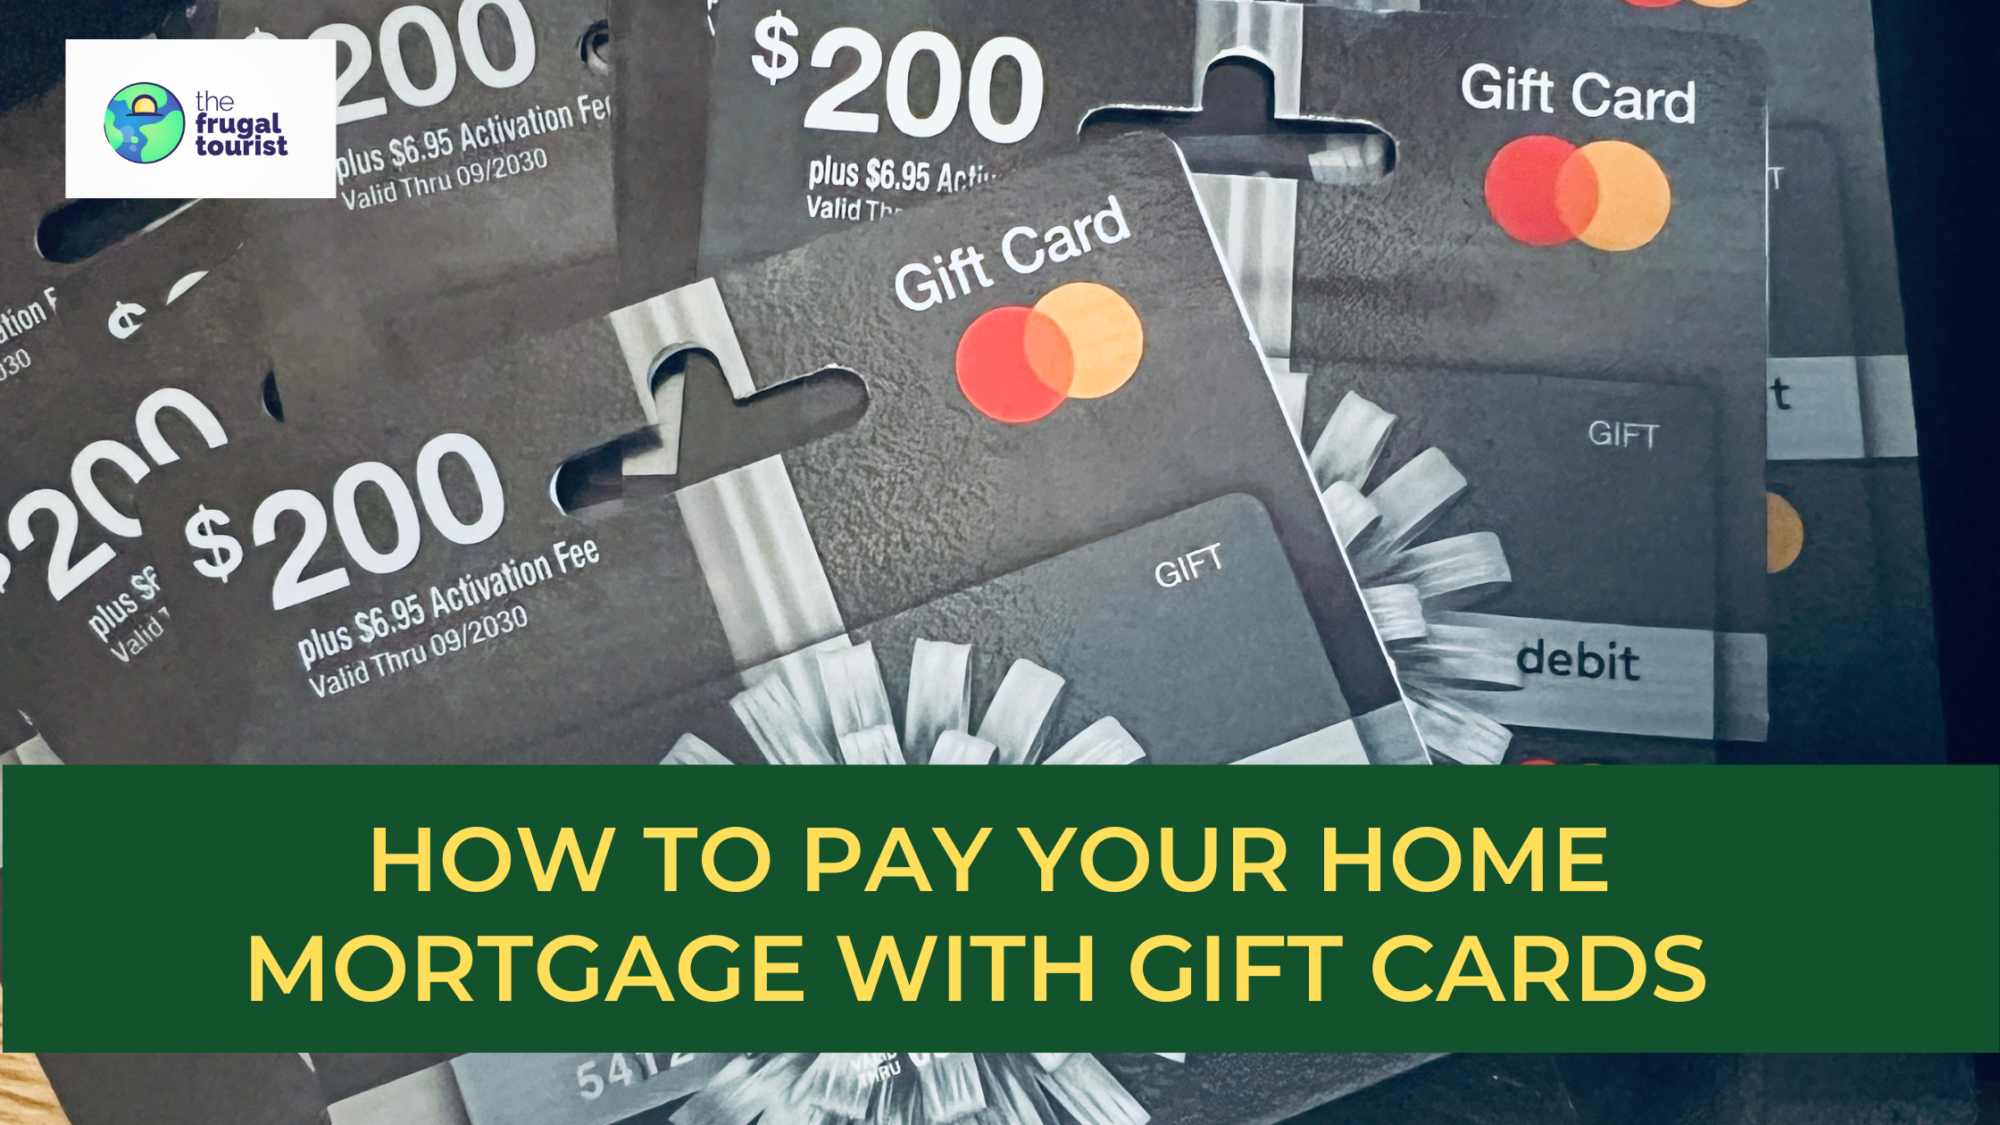 How to Pay Your Home Mortgage With Gift Cards and Earn Travel Points